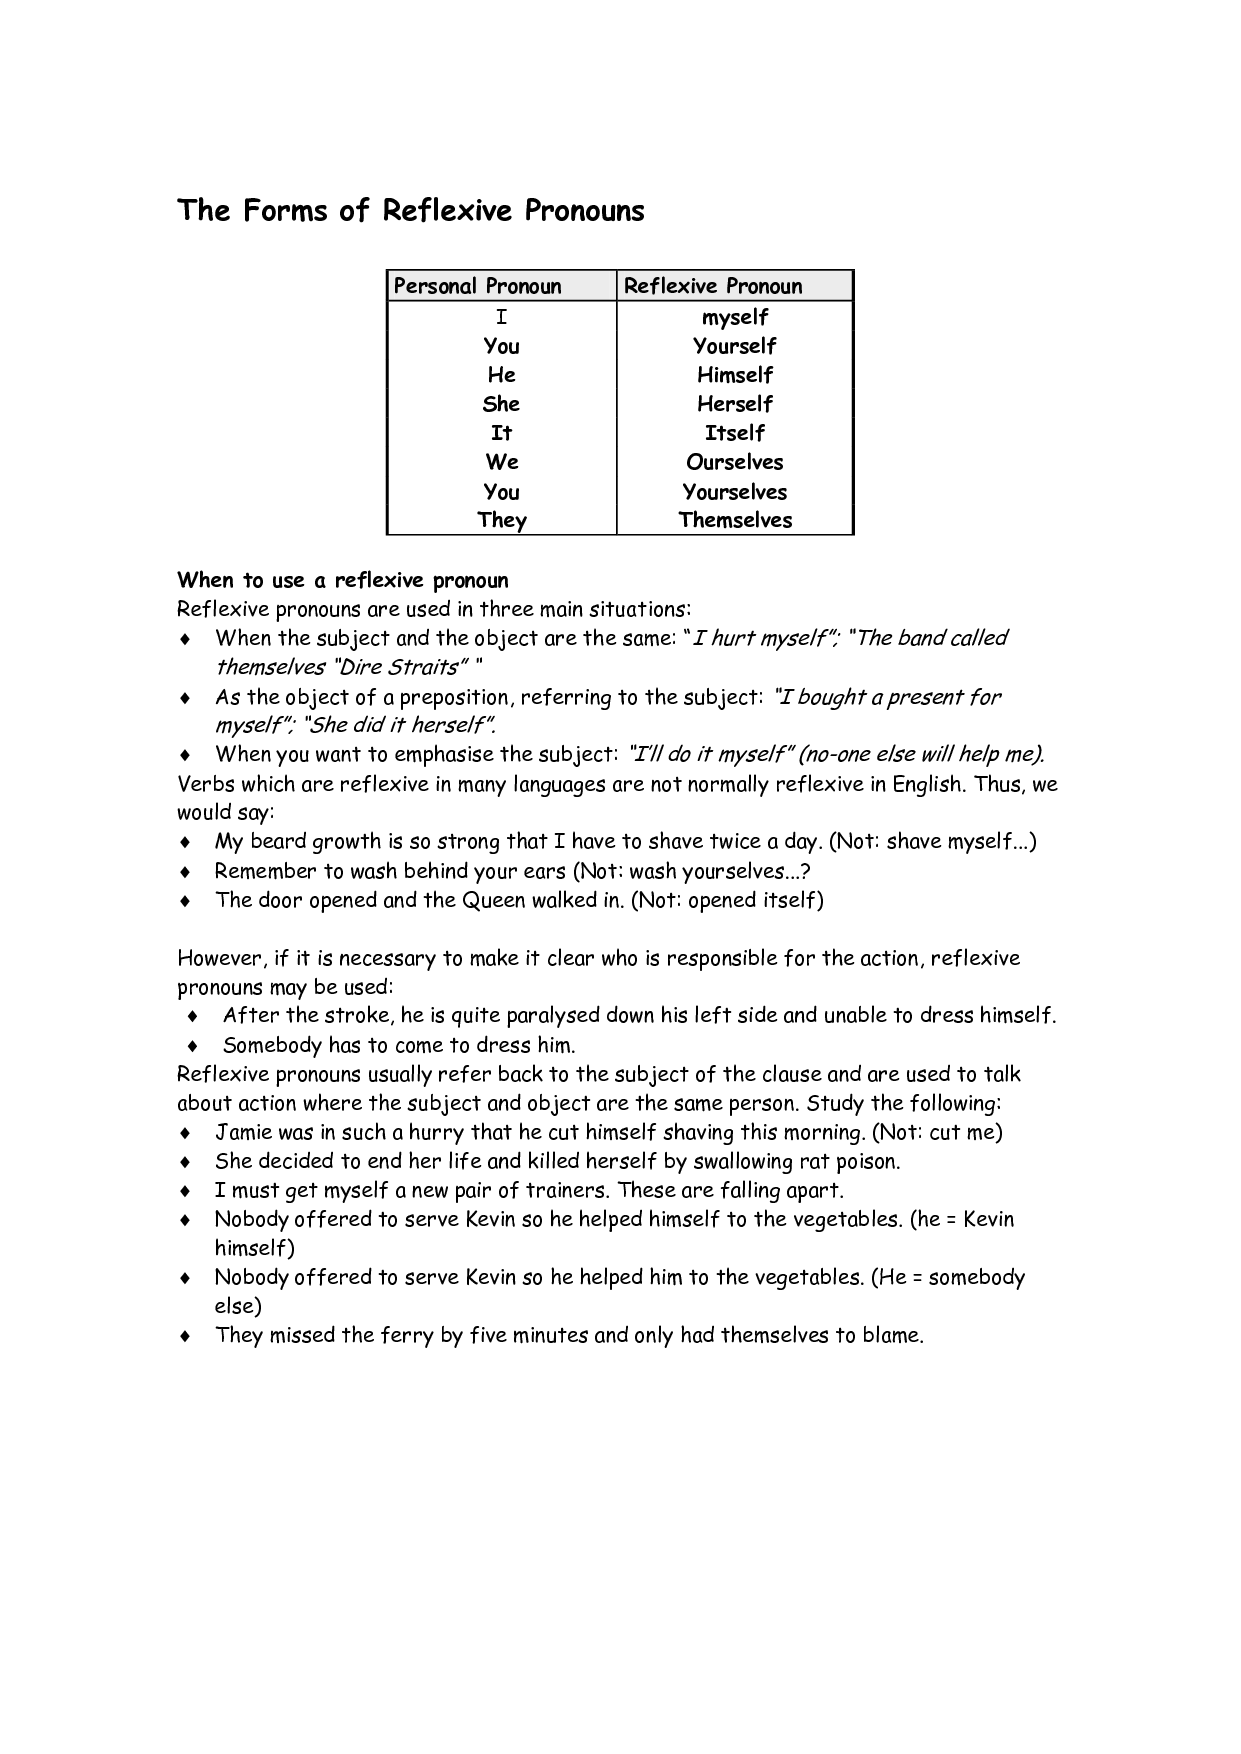 16-best-images-of-reflexive-pronouns-in-spanish-worksheet-spanish-reflexive-verbs-worksheet